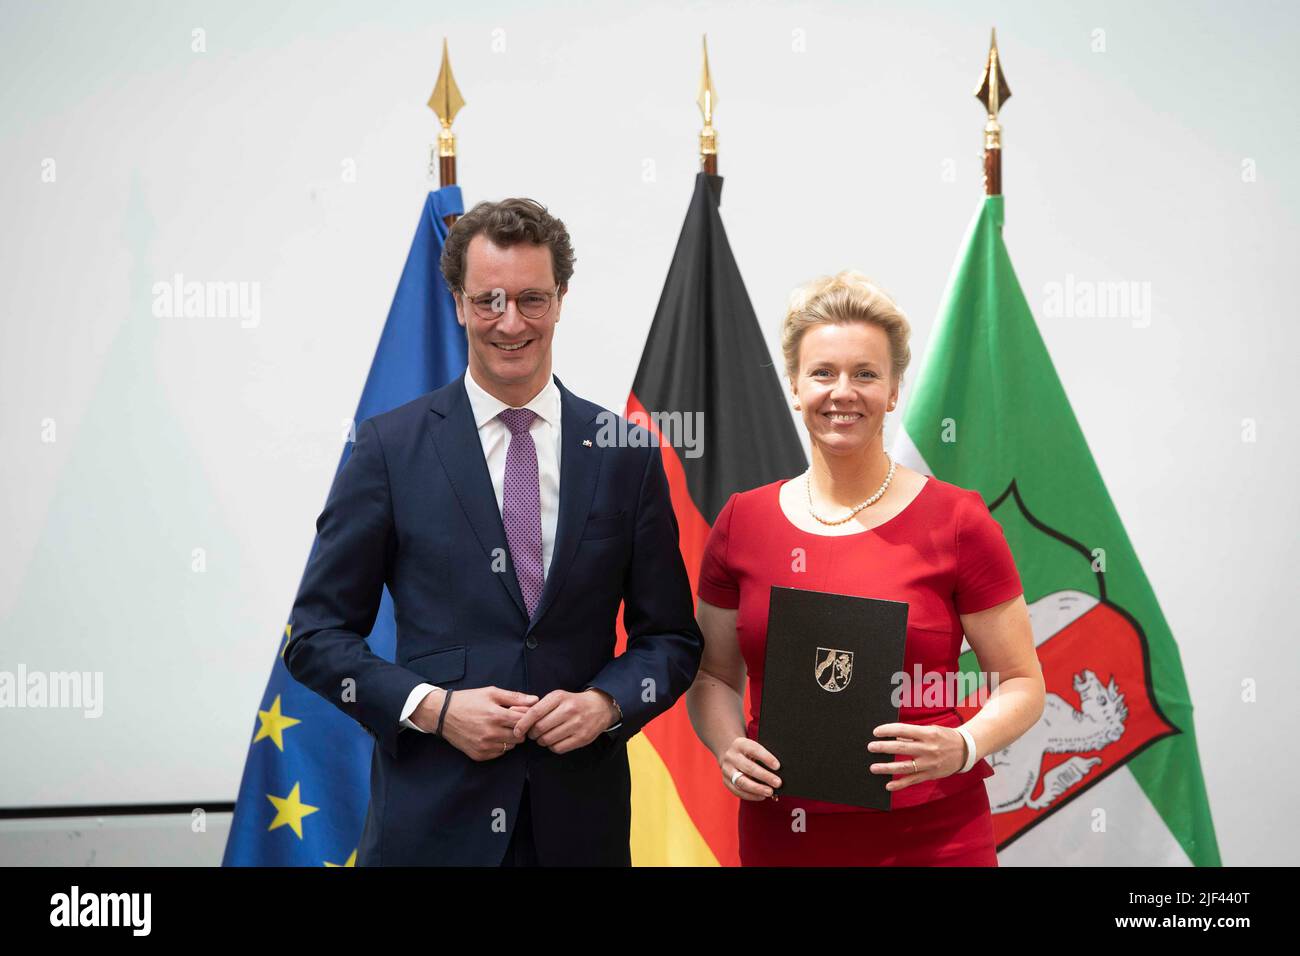 Hendrik Wuest, Wã St, CDU, Ministerpraesident of the State of North Rhine-Westphalia, appoints Ina Brandes, Minister for Culture and Science of the State of North Rhine-Westphalia, Ministerpraesident Henrik Wuest, his cabinet, in the Duesseldorf State House on June 29, 20120, © Sven Simon Photo Agency GmbH & Co. Press Photo KG # Princess-Luise-Str. 41 # 45479 M uelheim/R uhr # Tel. 0208/9413250 # Fax. 0208/9413260 # GLS Bank # BLZ 430 609 67 # Kto. 4030 025 100 # IBAN DE75 4306 0967 4030 0251 00 # BIC GENODEM1GLS # www.svensimon.net TOP 2: How do the secret plans to reduce old municipal deb Stock Photo